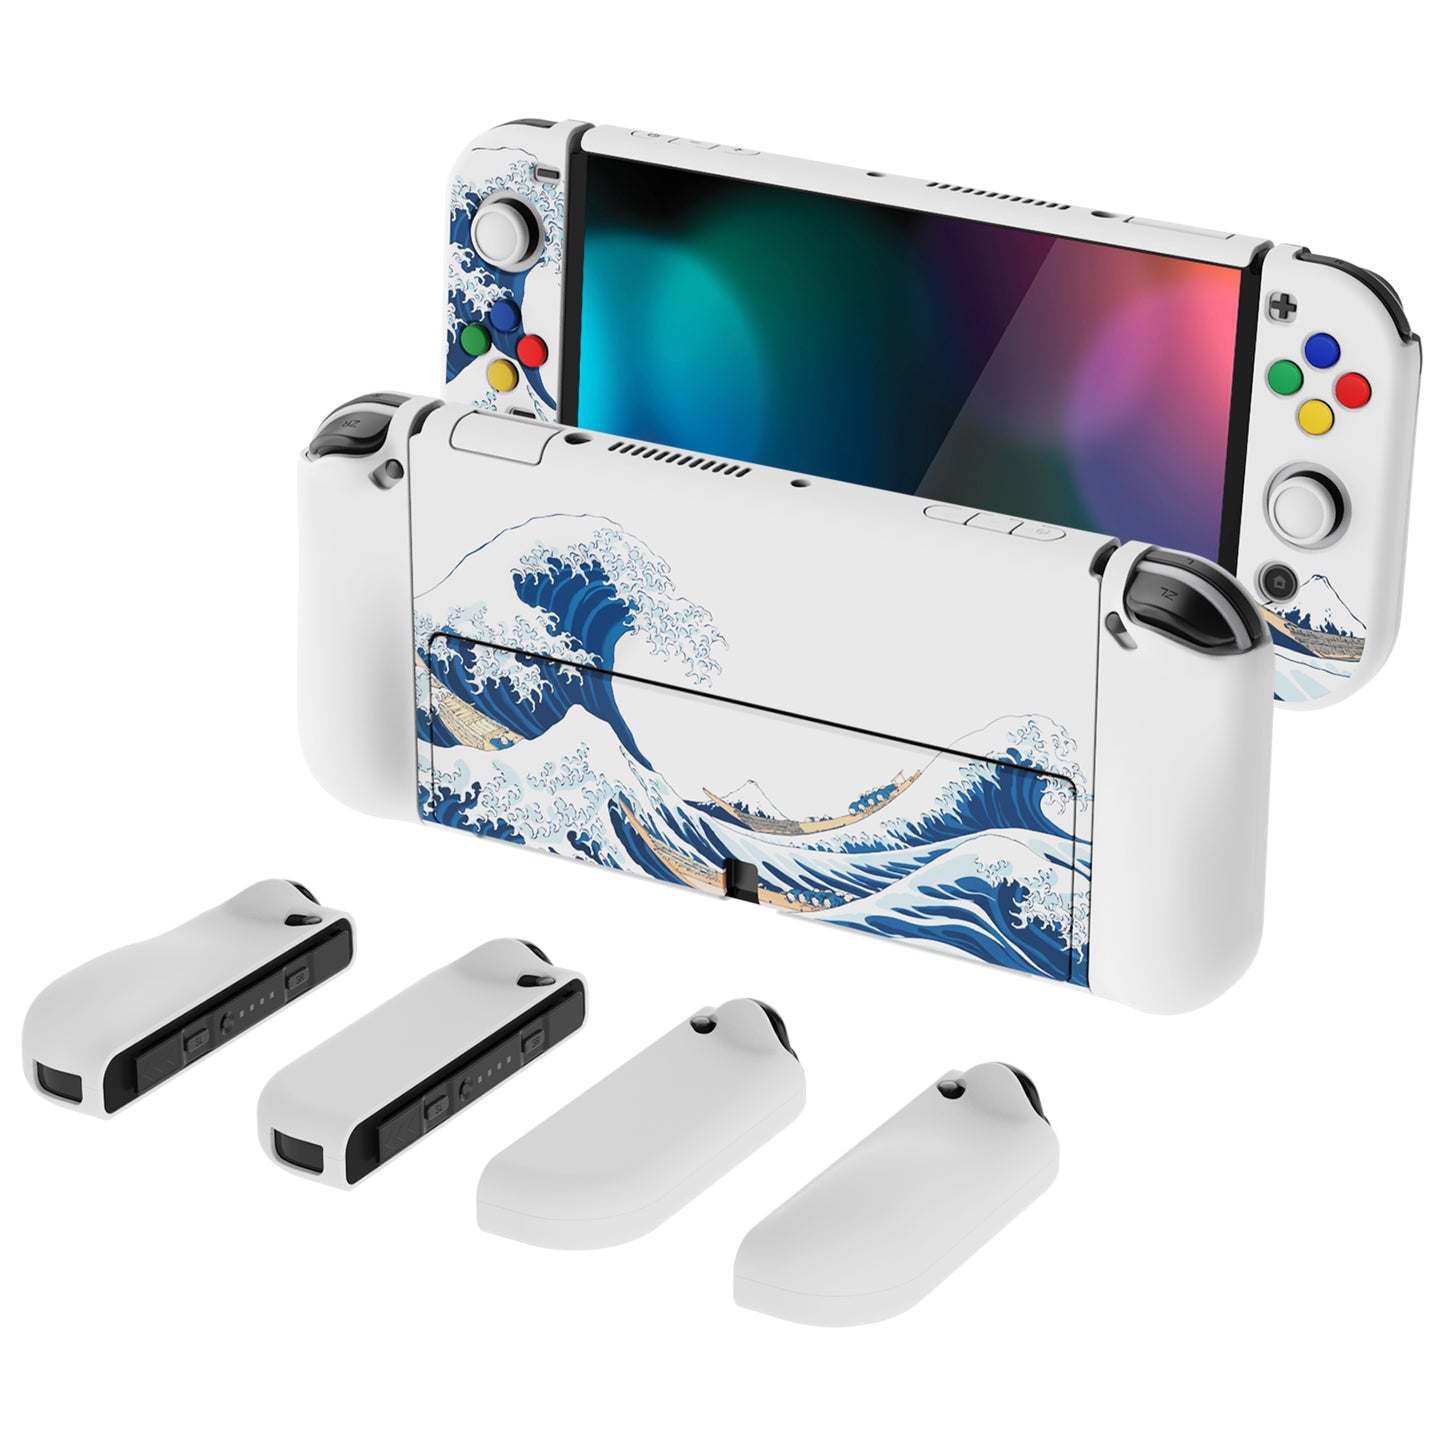 PlayVital AlterGrips Protective Slim Case for Nintendo Switch OLED, Ergonomic Grip Cover for Joycon, Dockable Hard Shell for Switch OLED w/Thumb Grip Caps & Button Caps - The Great Wave off Kanagawa - JSOYT001 playvital